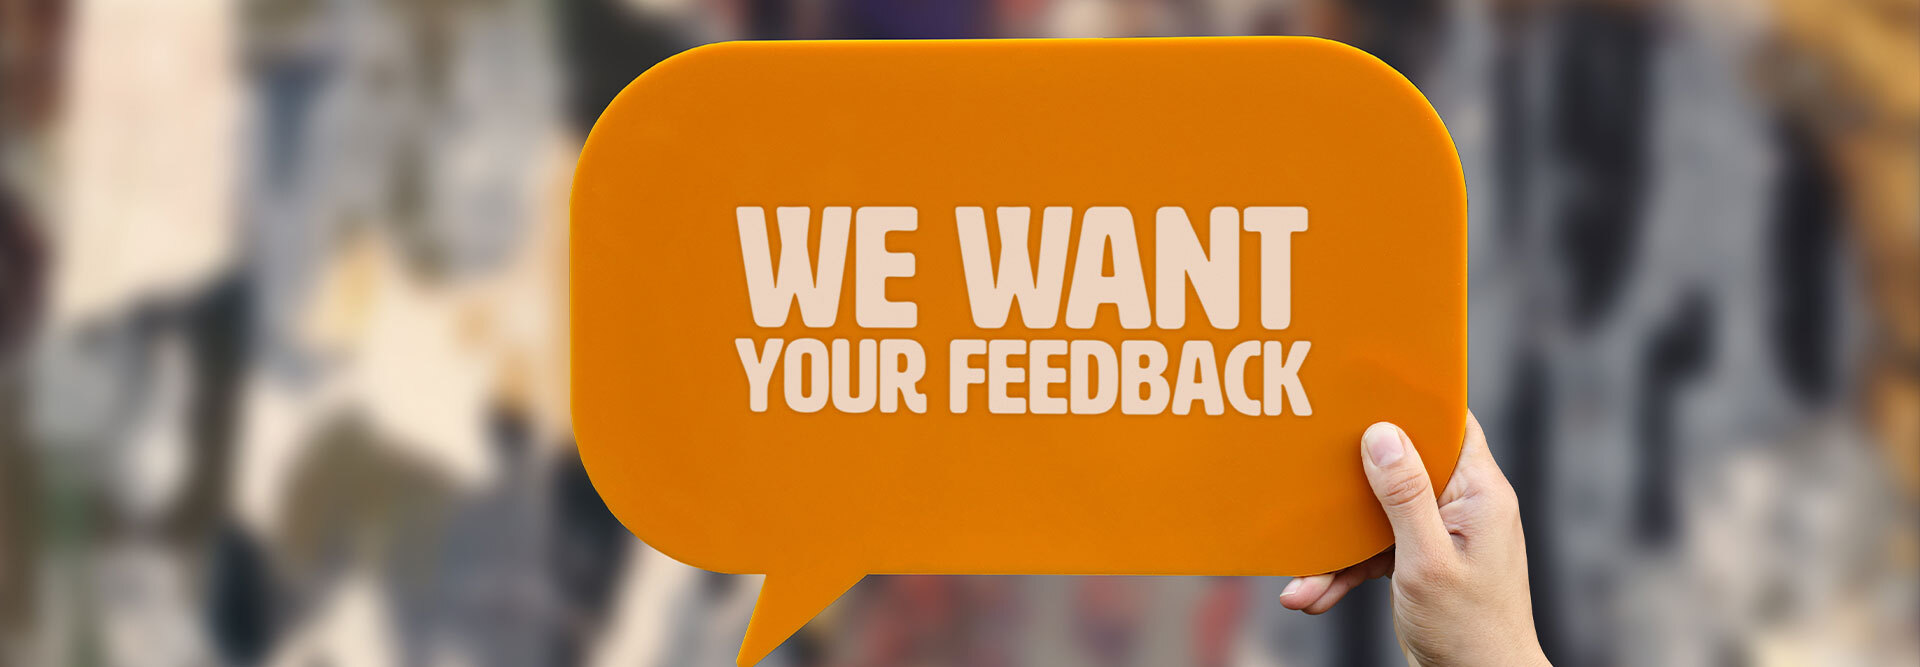 A speech bubble that states “We want feedback” to depict ways to instantly ask for a review request from happy customers.